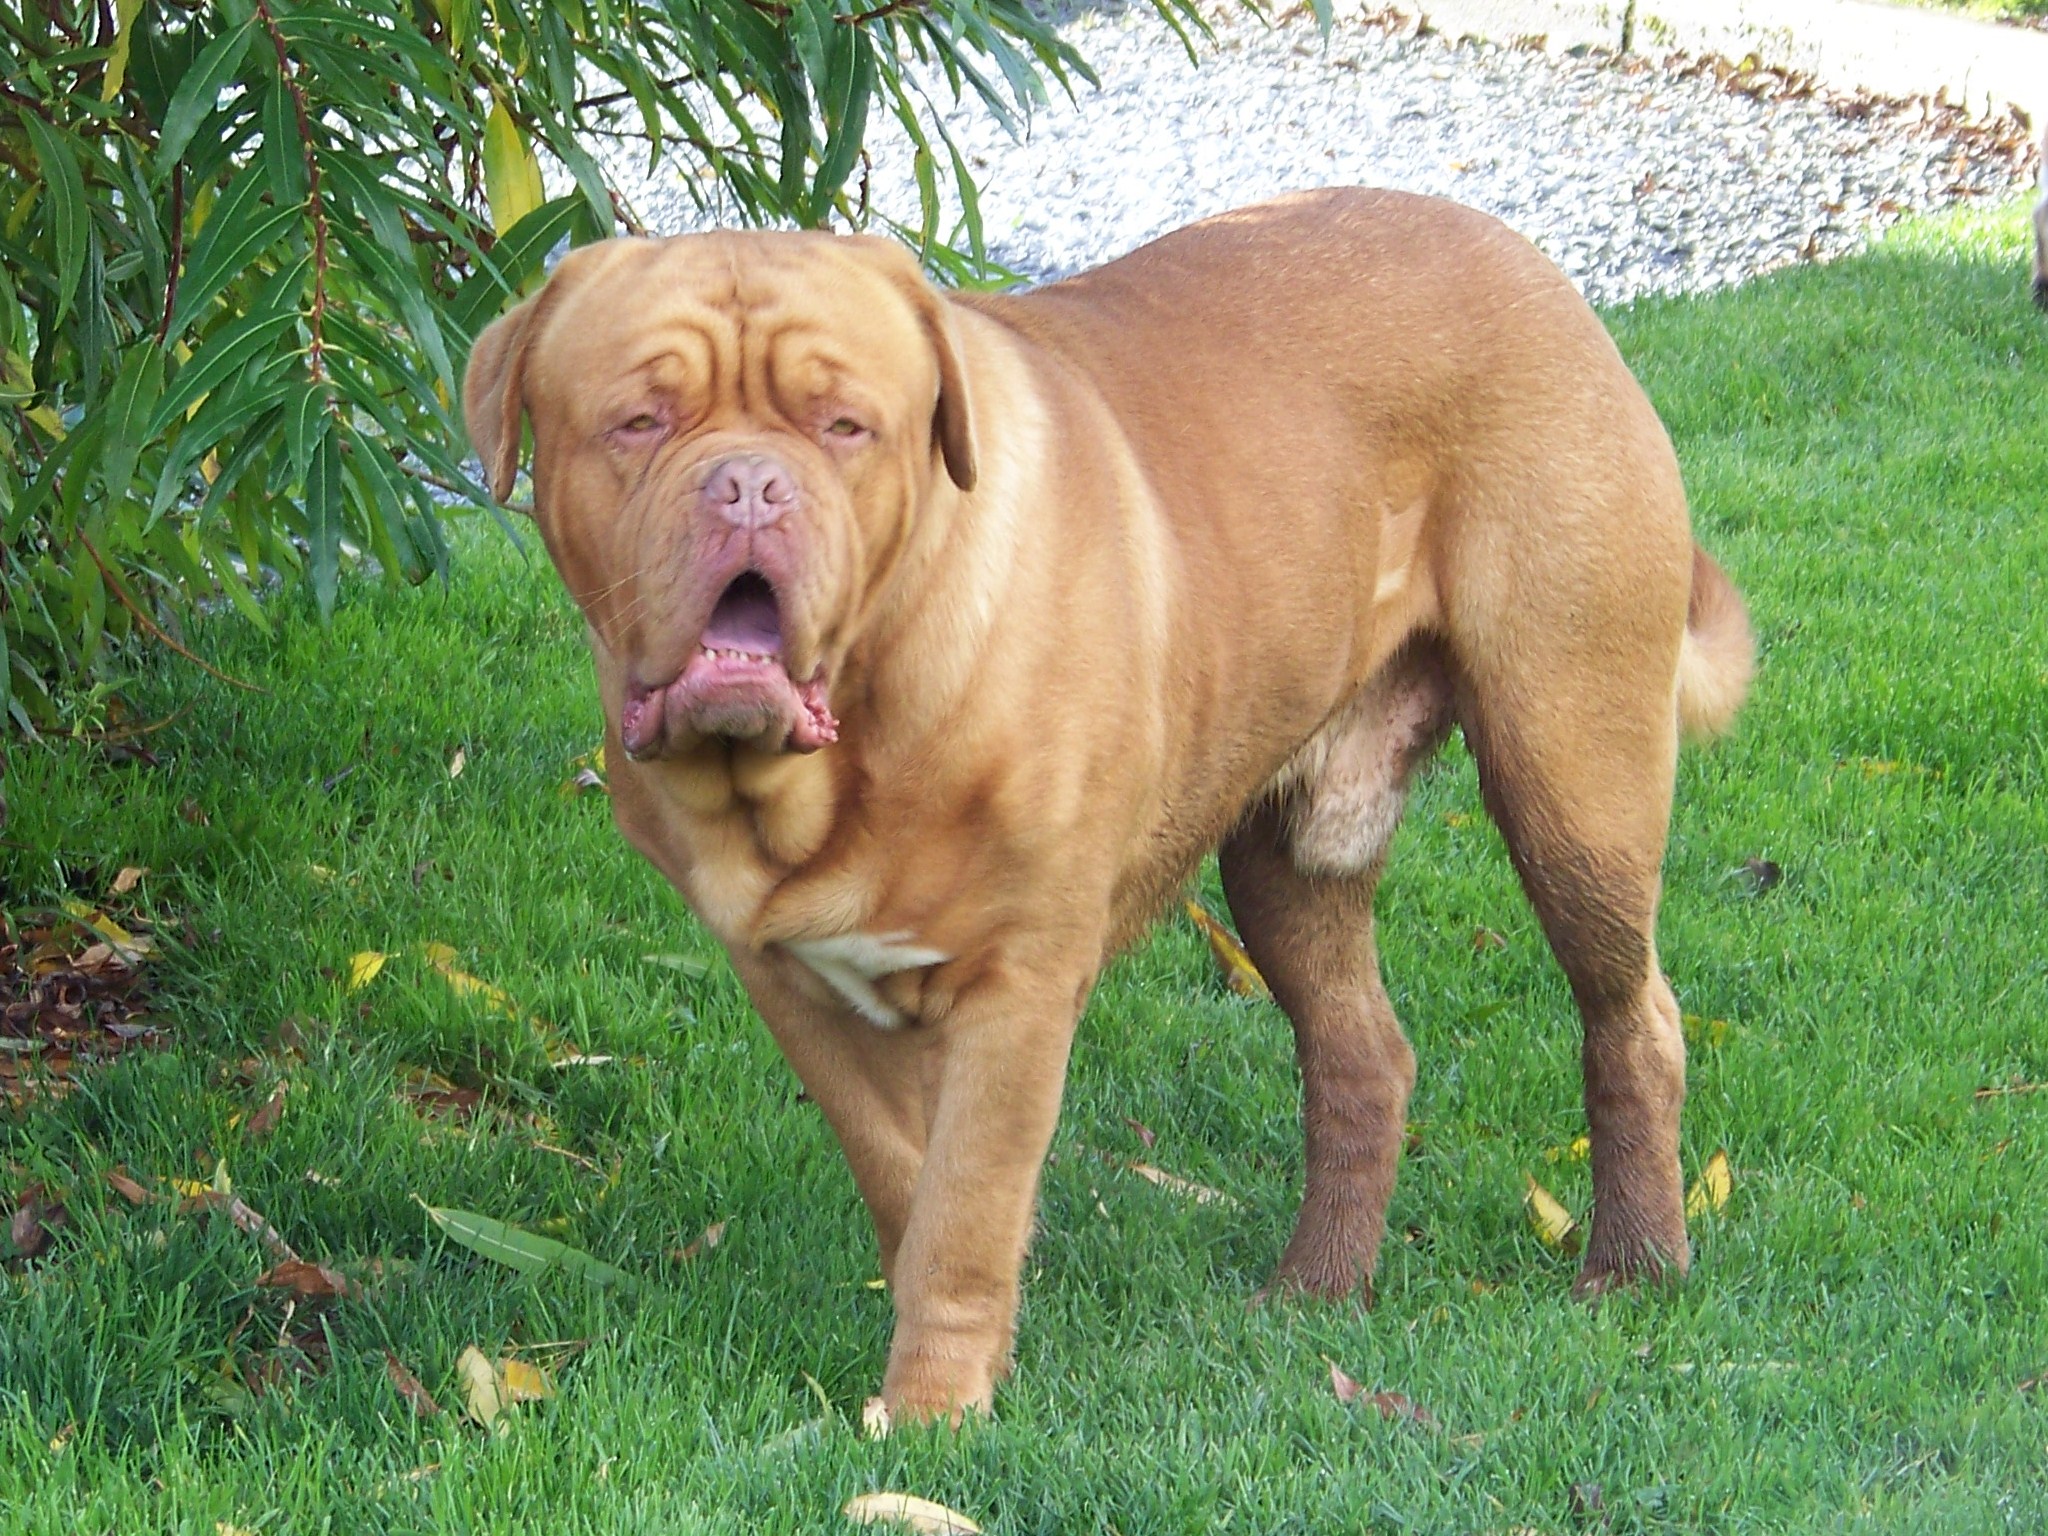 De Bordeaux Dog In The Grass Photo And Wallpaper Beautiful Dogue